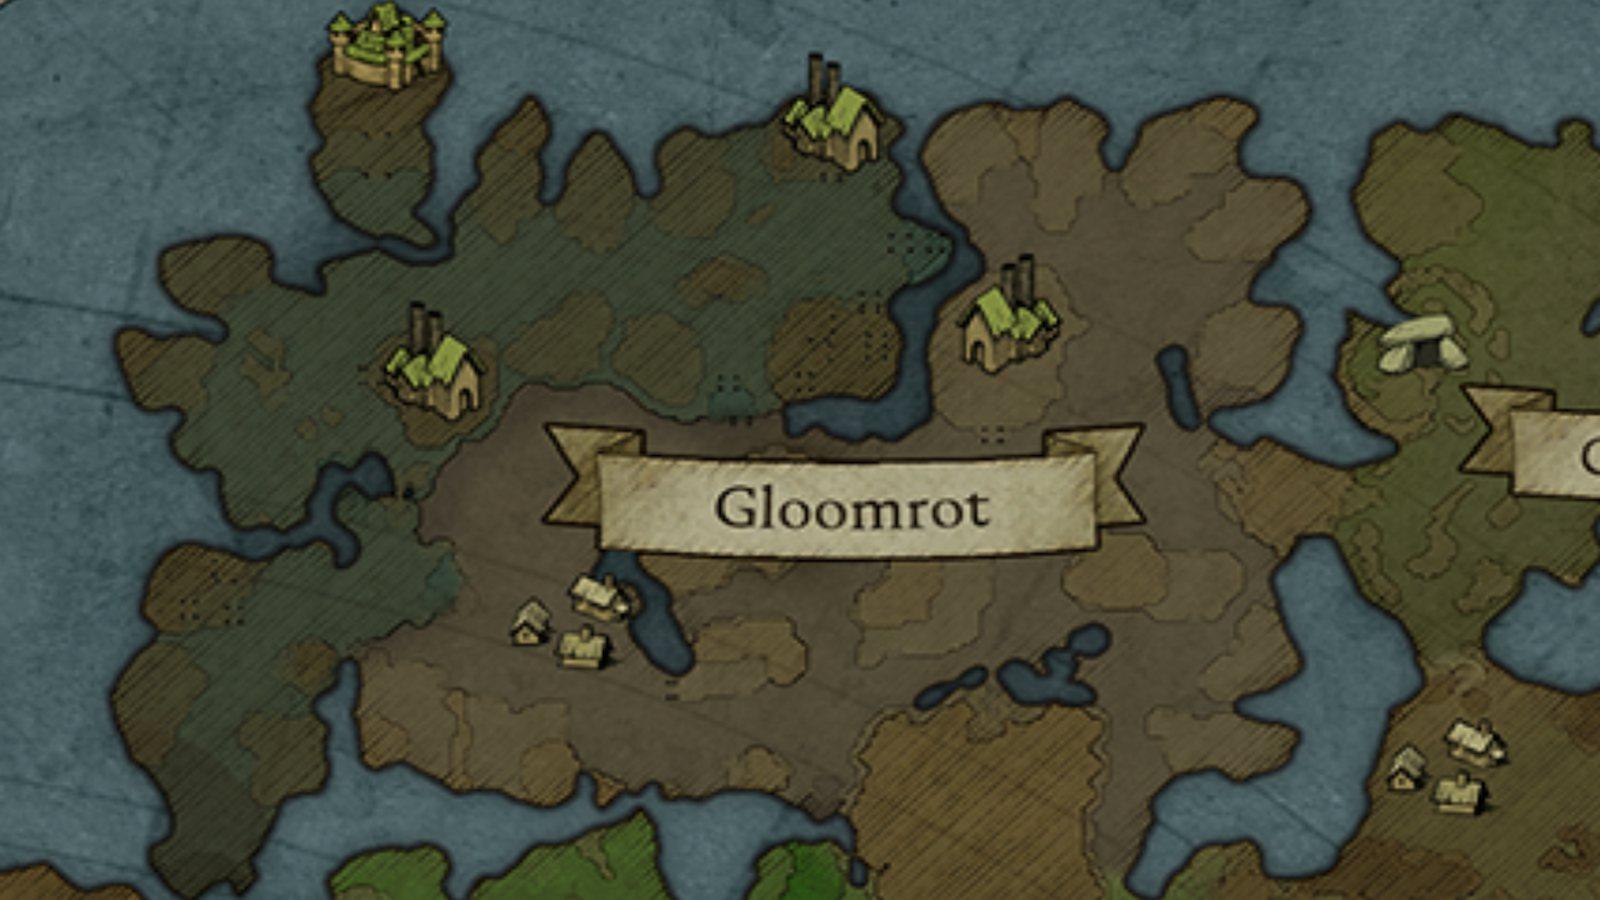 Gloomroot map from V Rising